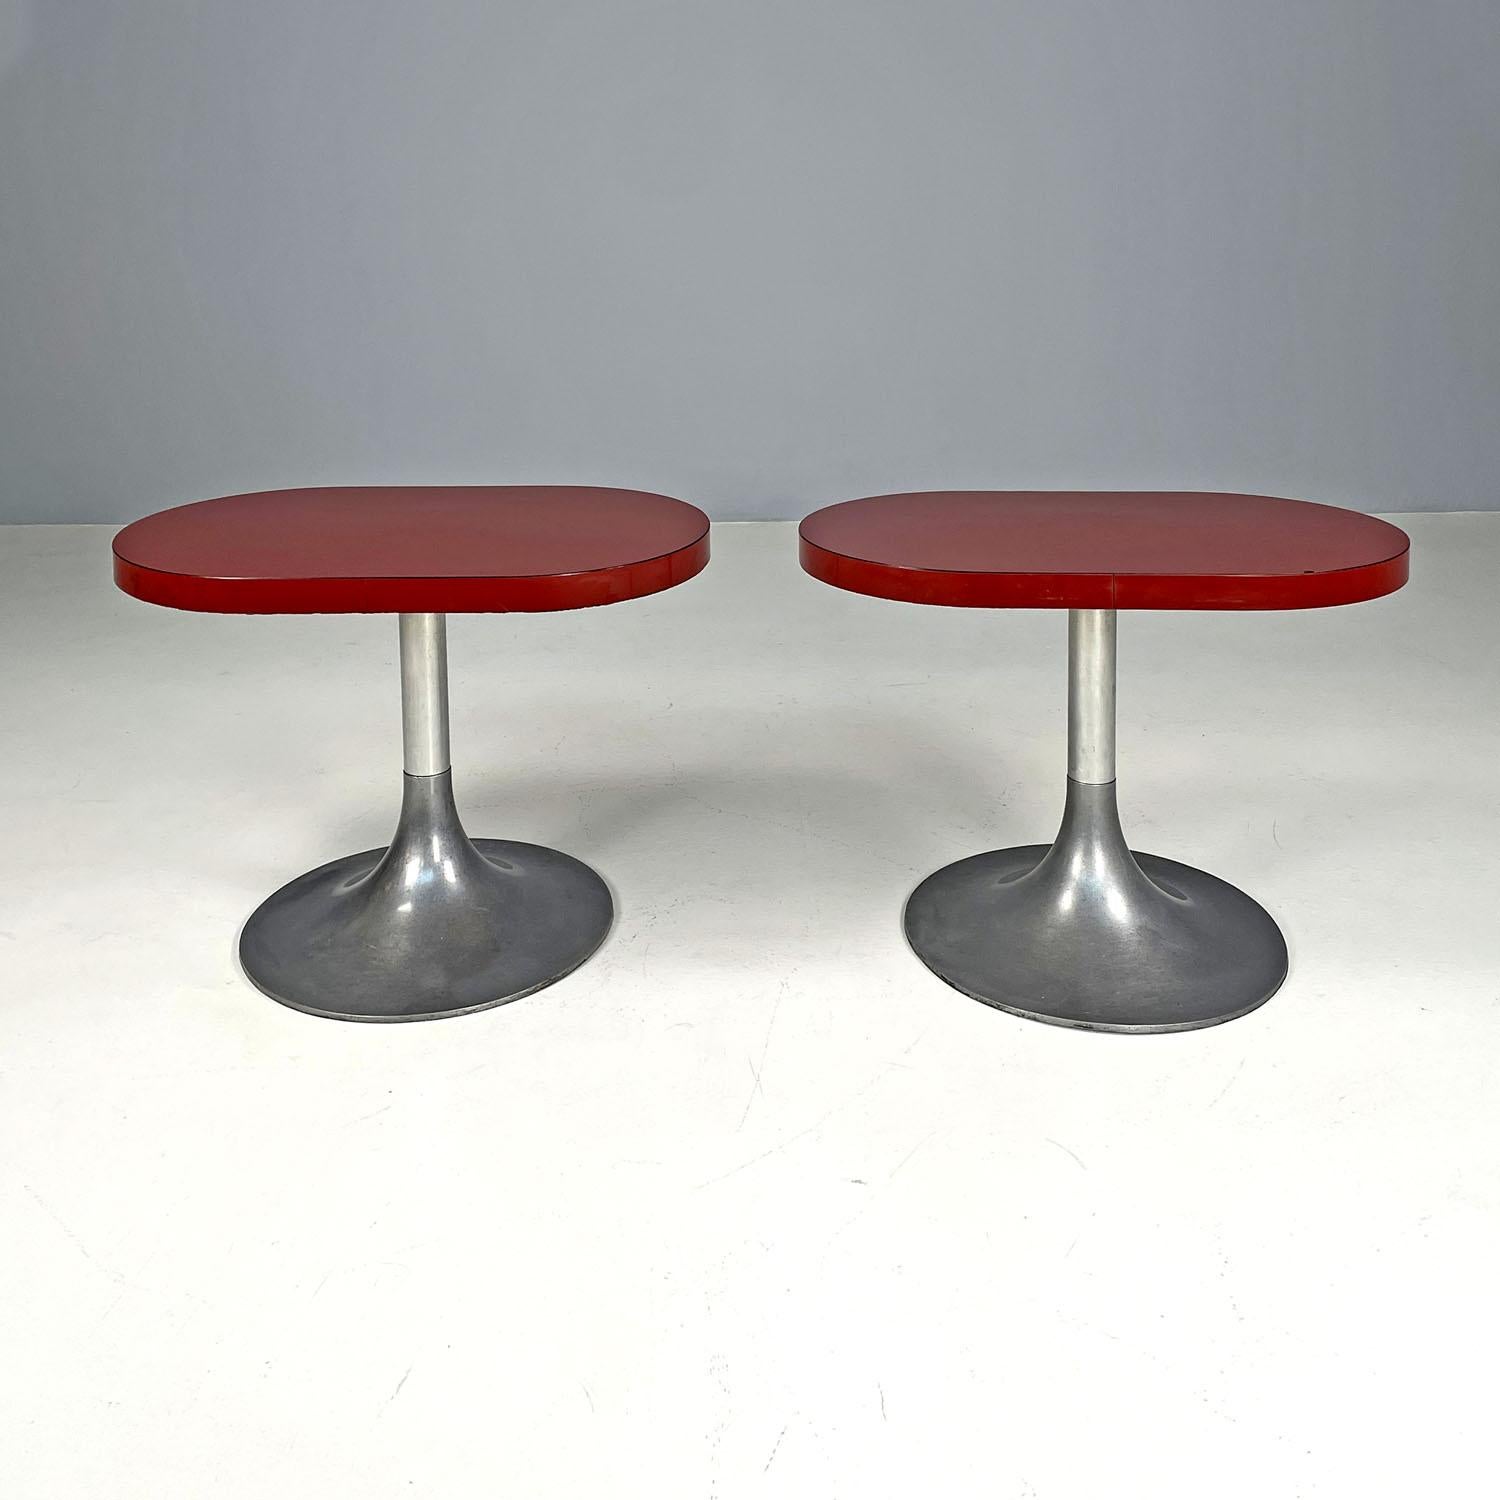 Italian modern oval coffee tables with red laminate tops, 1980s 
Pair of coffee tables with oval top. The wooden top is covered in red laminate, as is its thickness. They feature a central metal stem and Tulip style base.
1980s.
Vintage condition,